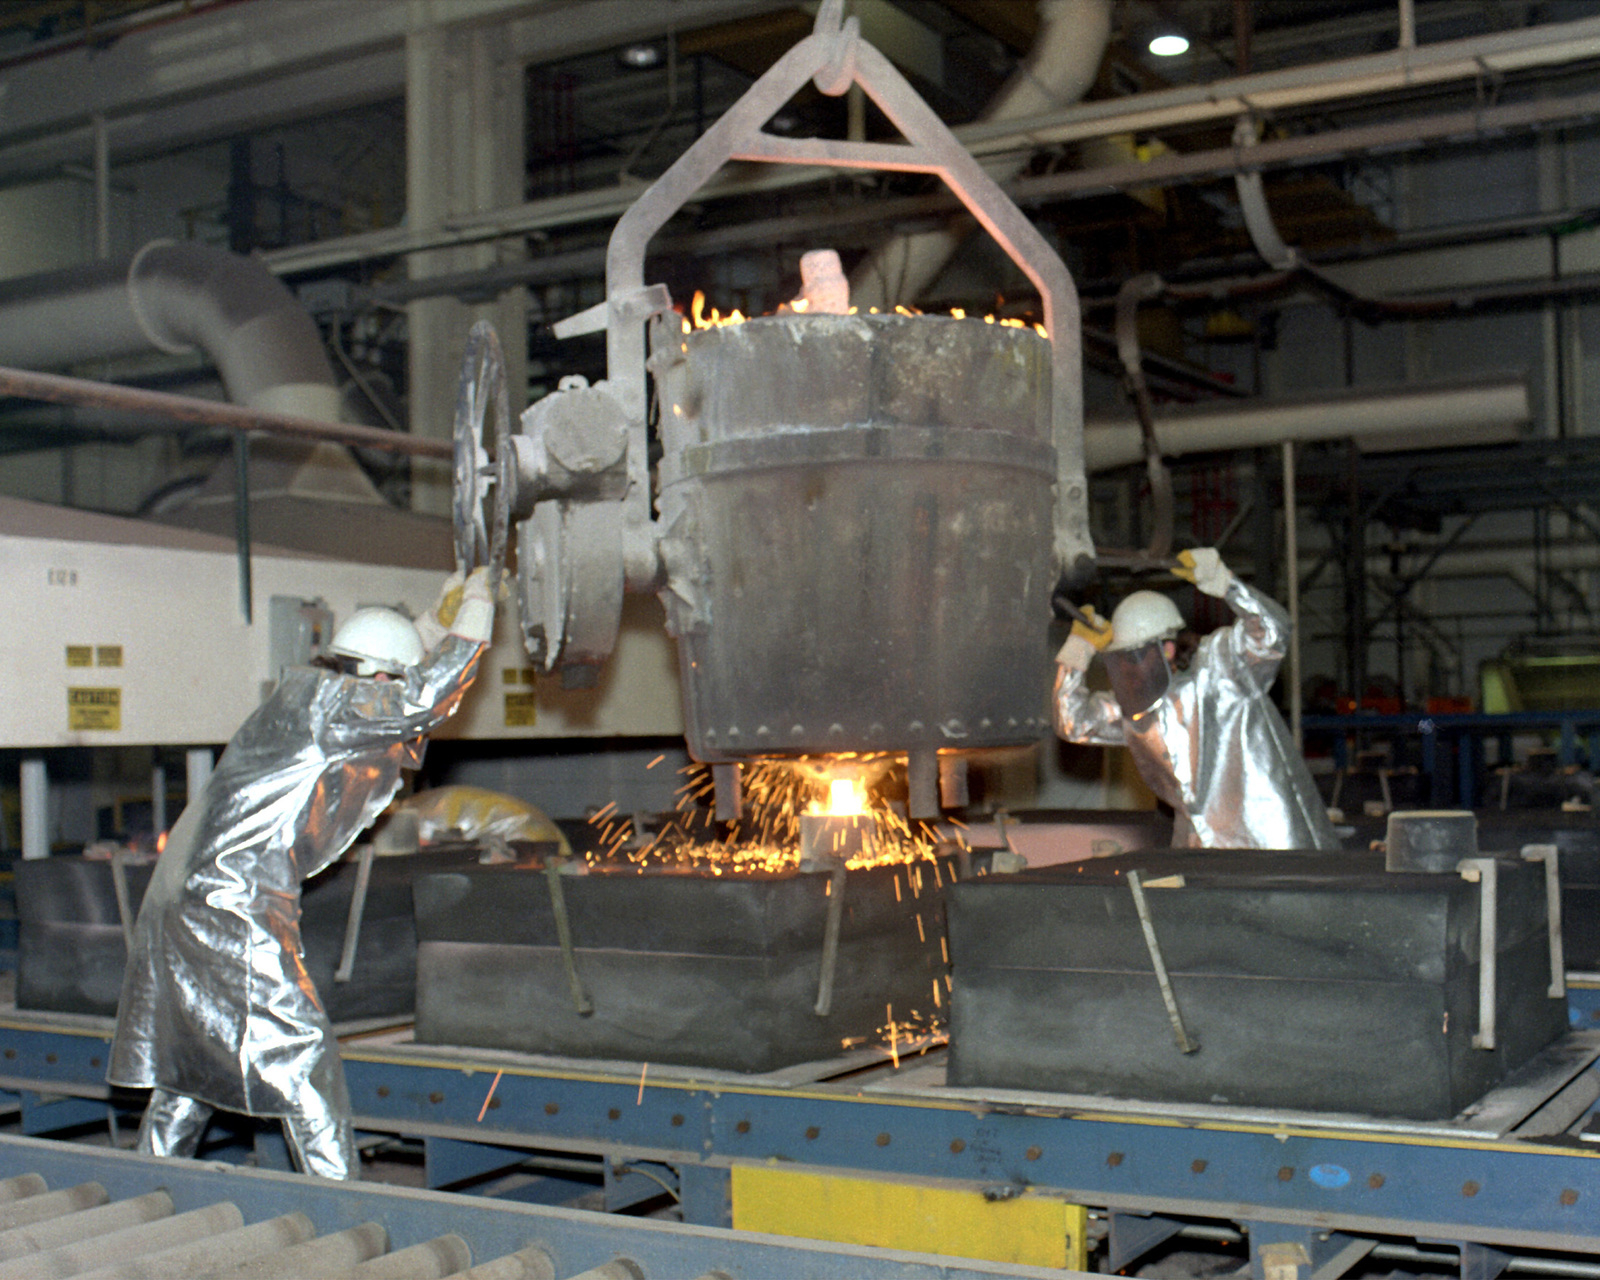 everette-olive-and-jeff-boese-pour-molten-metal-from-a-foundry-bucket-at-the-79beaa-1600.jpg